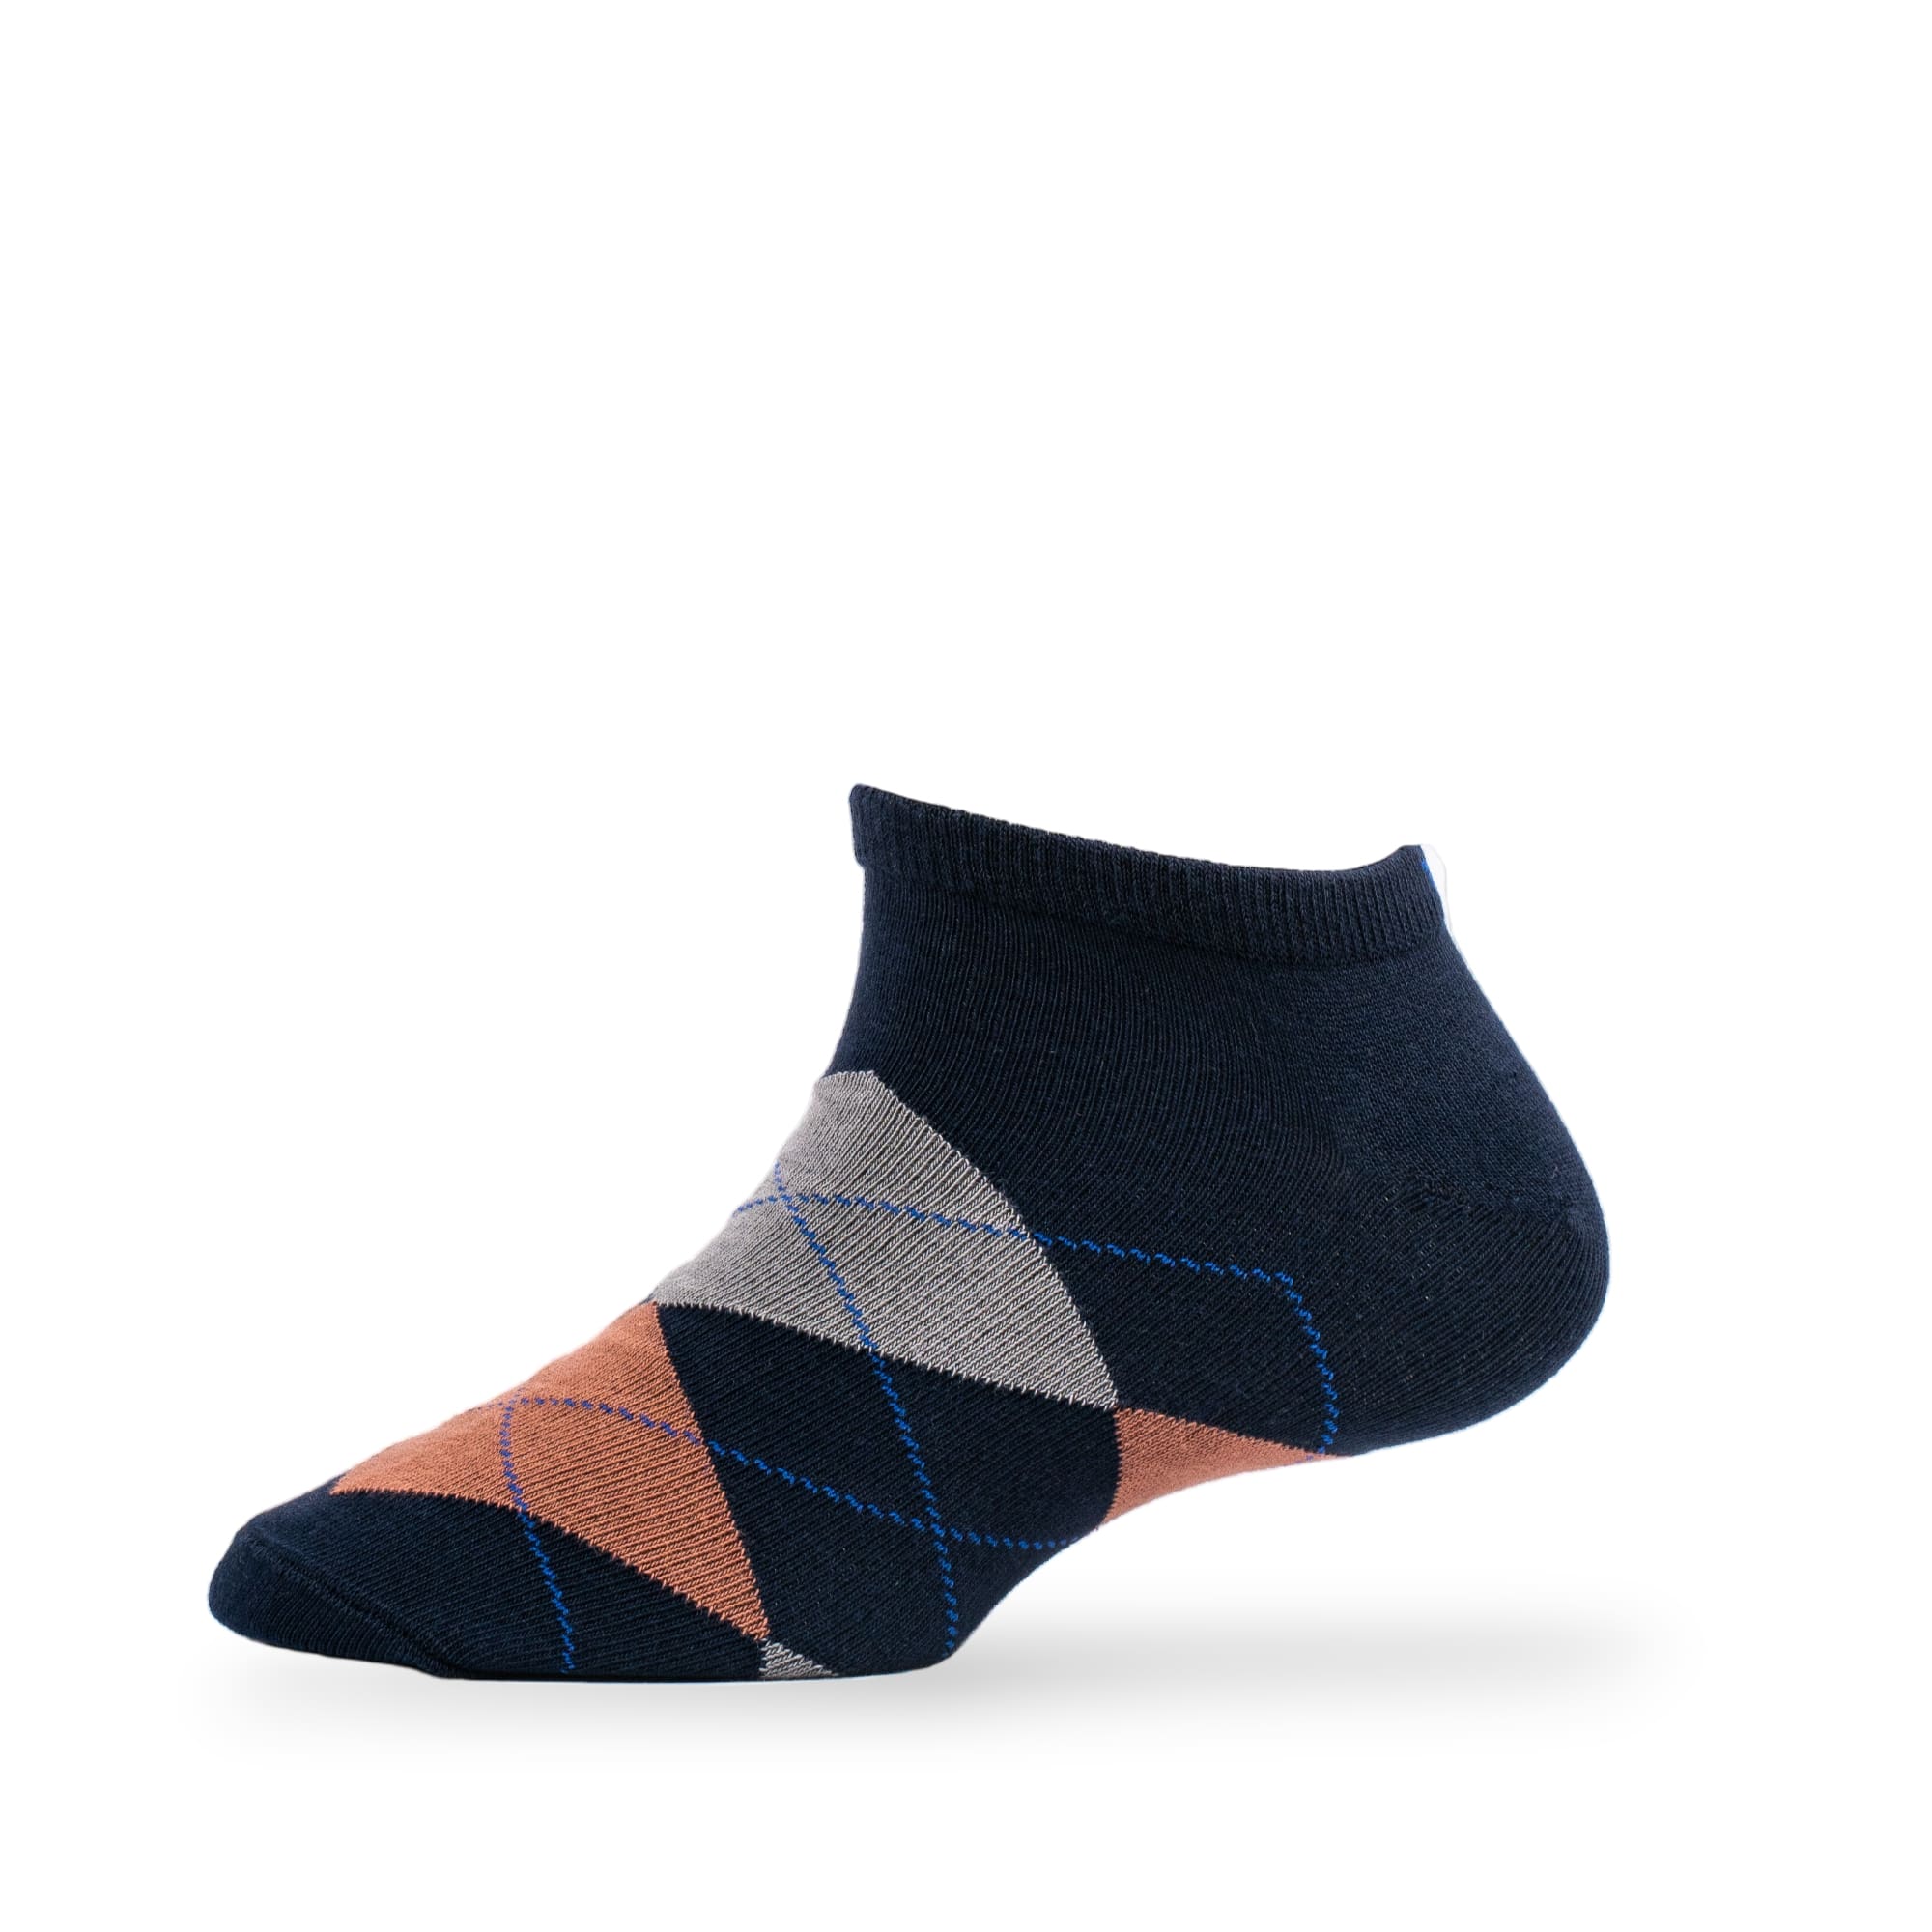 Young Wings Men's Multi Colour Cotton Fabric Design Low Ankle Length Socks - Pack of 5, Style no. 1705-M1